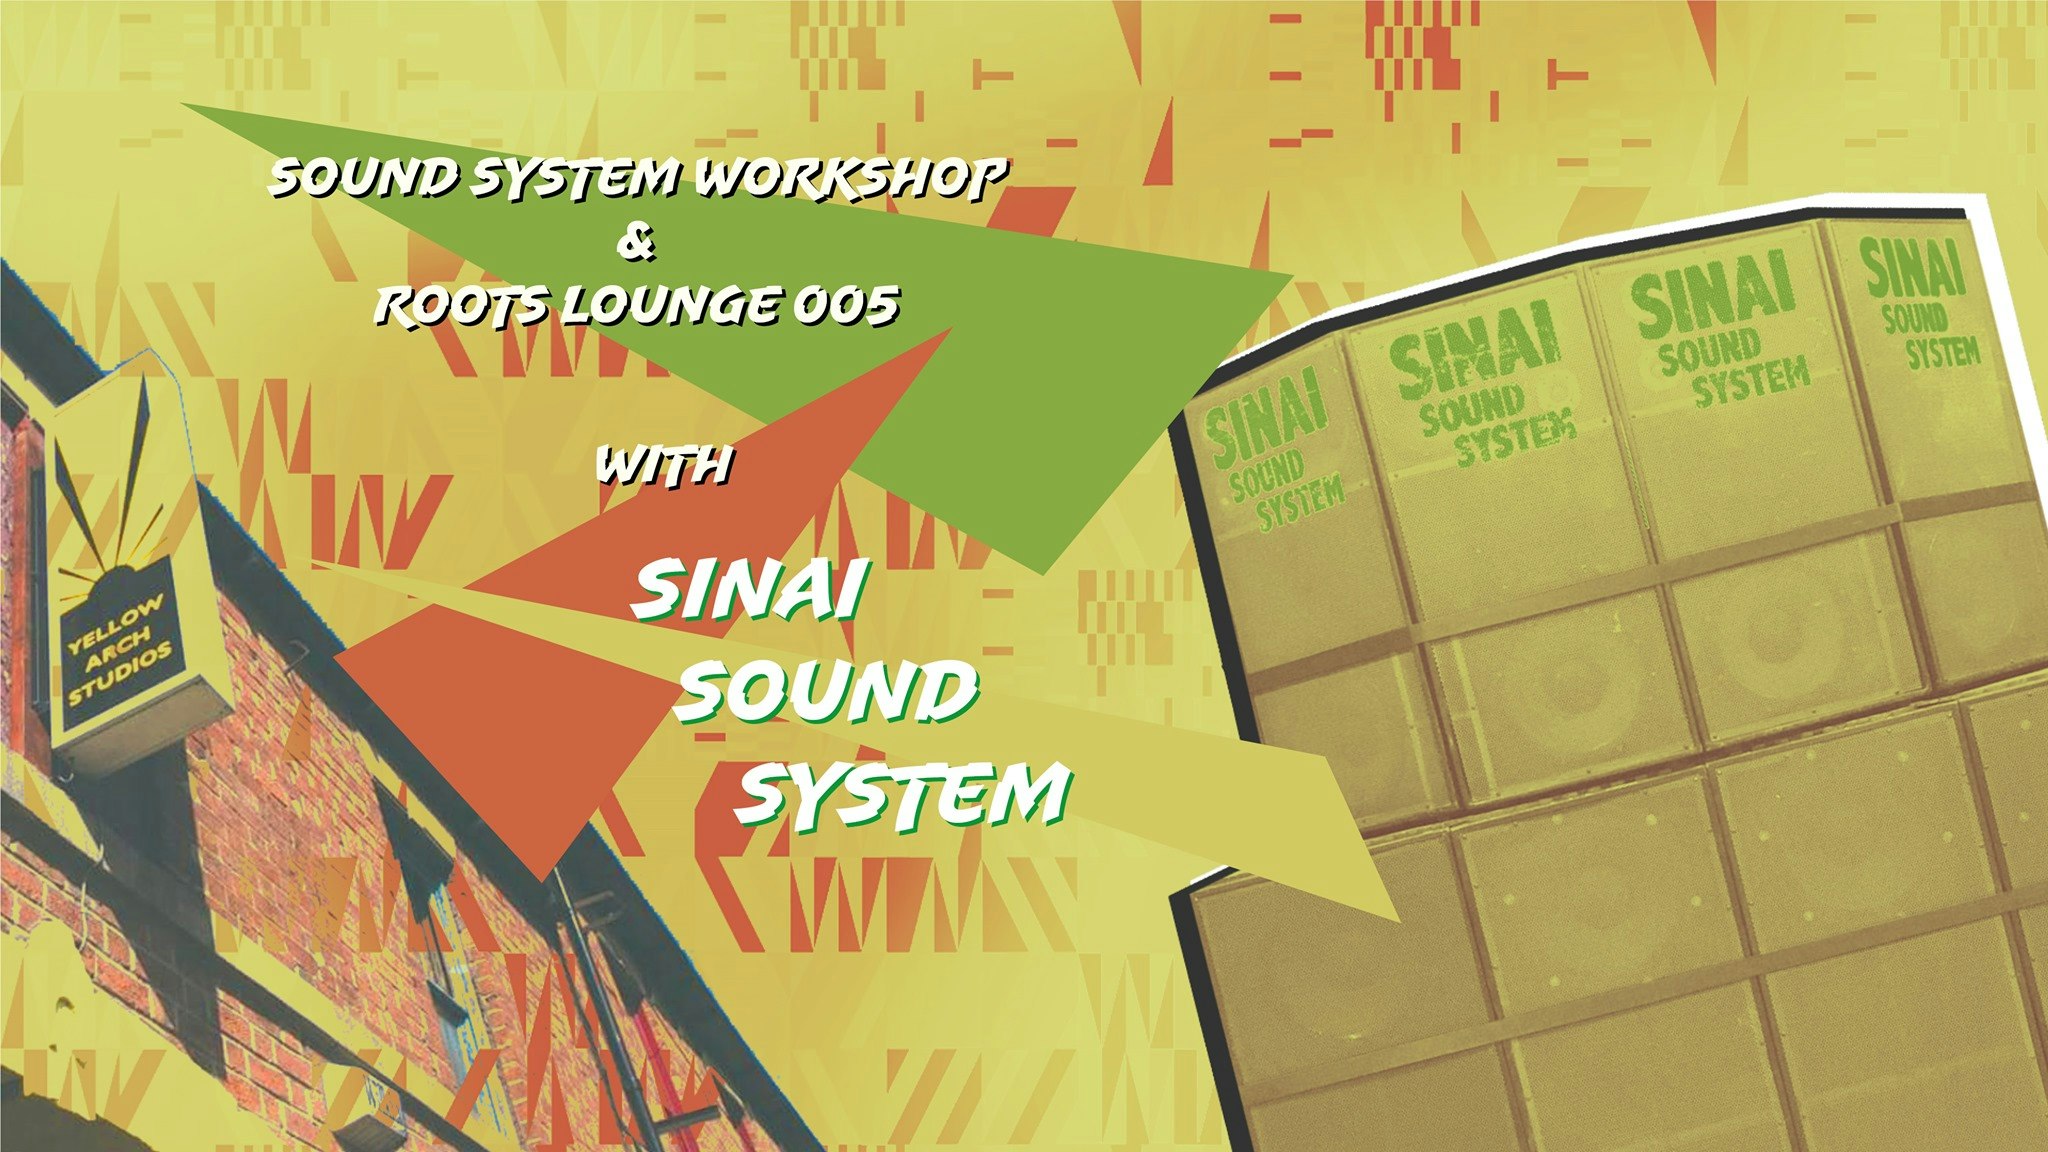 Roots Lounge 005 & Sound System Workshop with Sinai Sound System